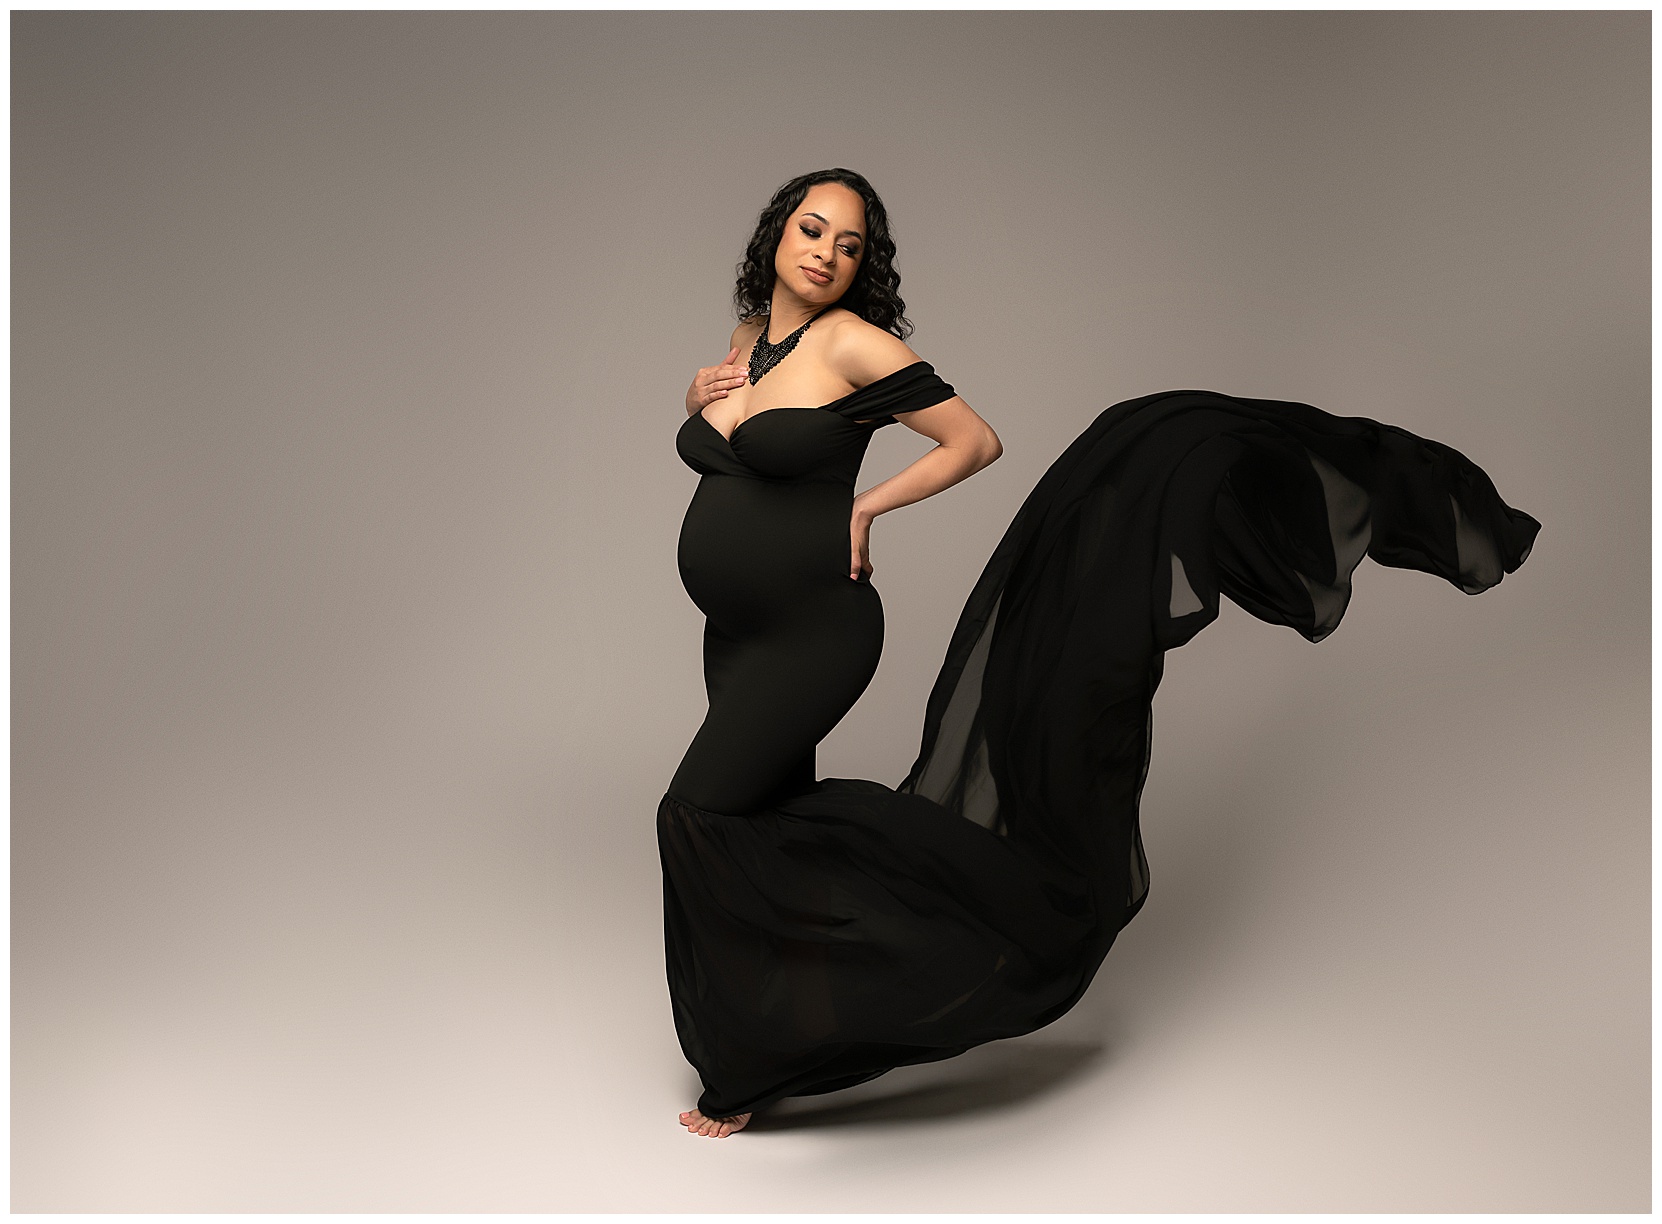 Pic 3: A dramatic color baby bump photo of a pregnant woman in a black maternity gown in front of a plain gray background.